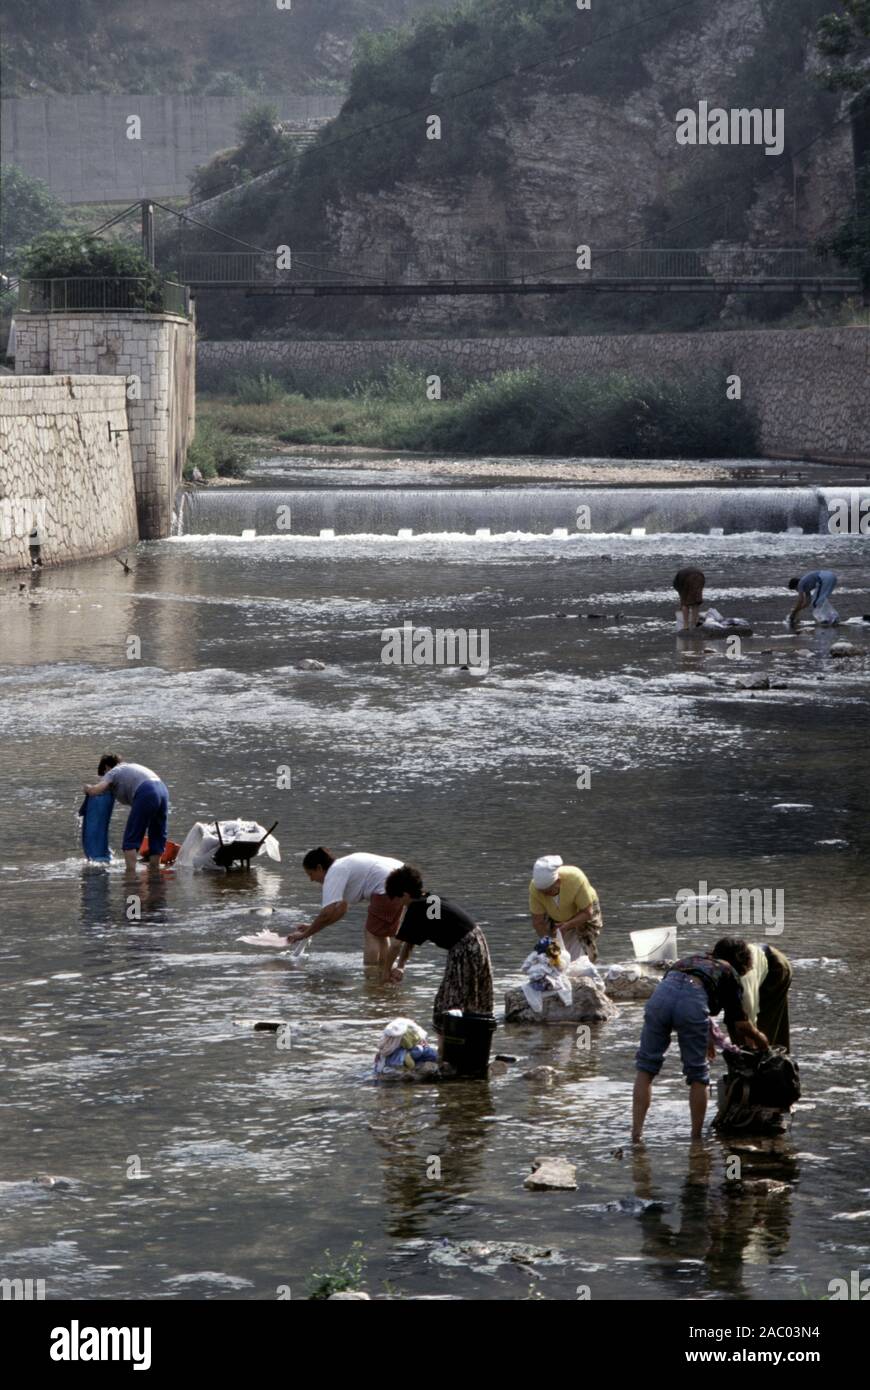 9th August 1993 During the Siege of Sarajevo: women wash laundry in the River Miljacka, just upriver from the National Art Gallery and Library. Stock Photo